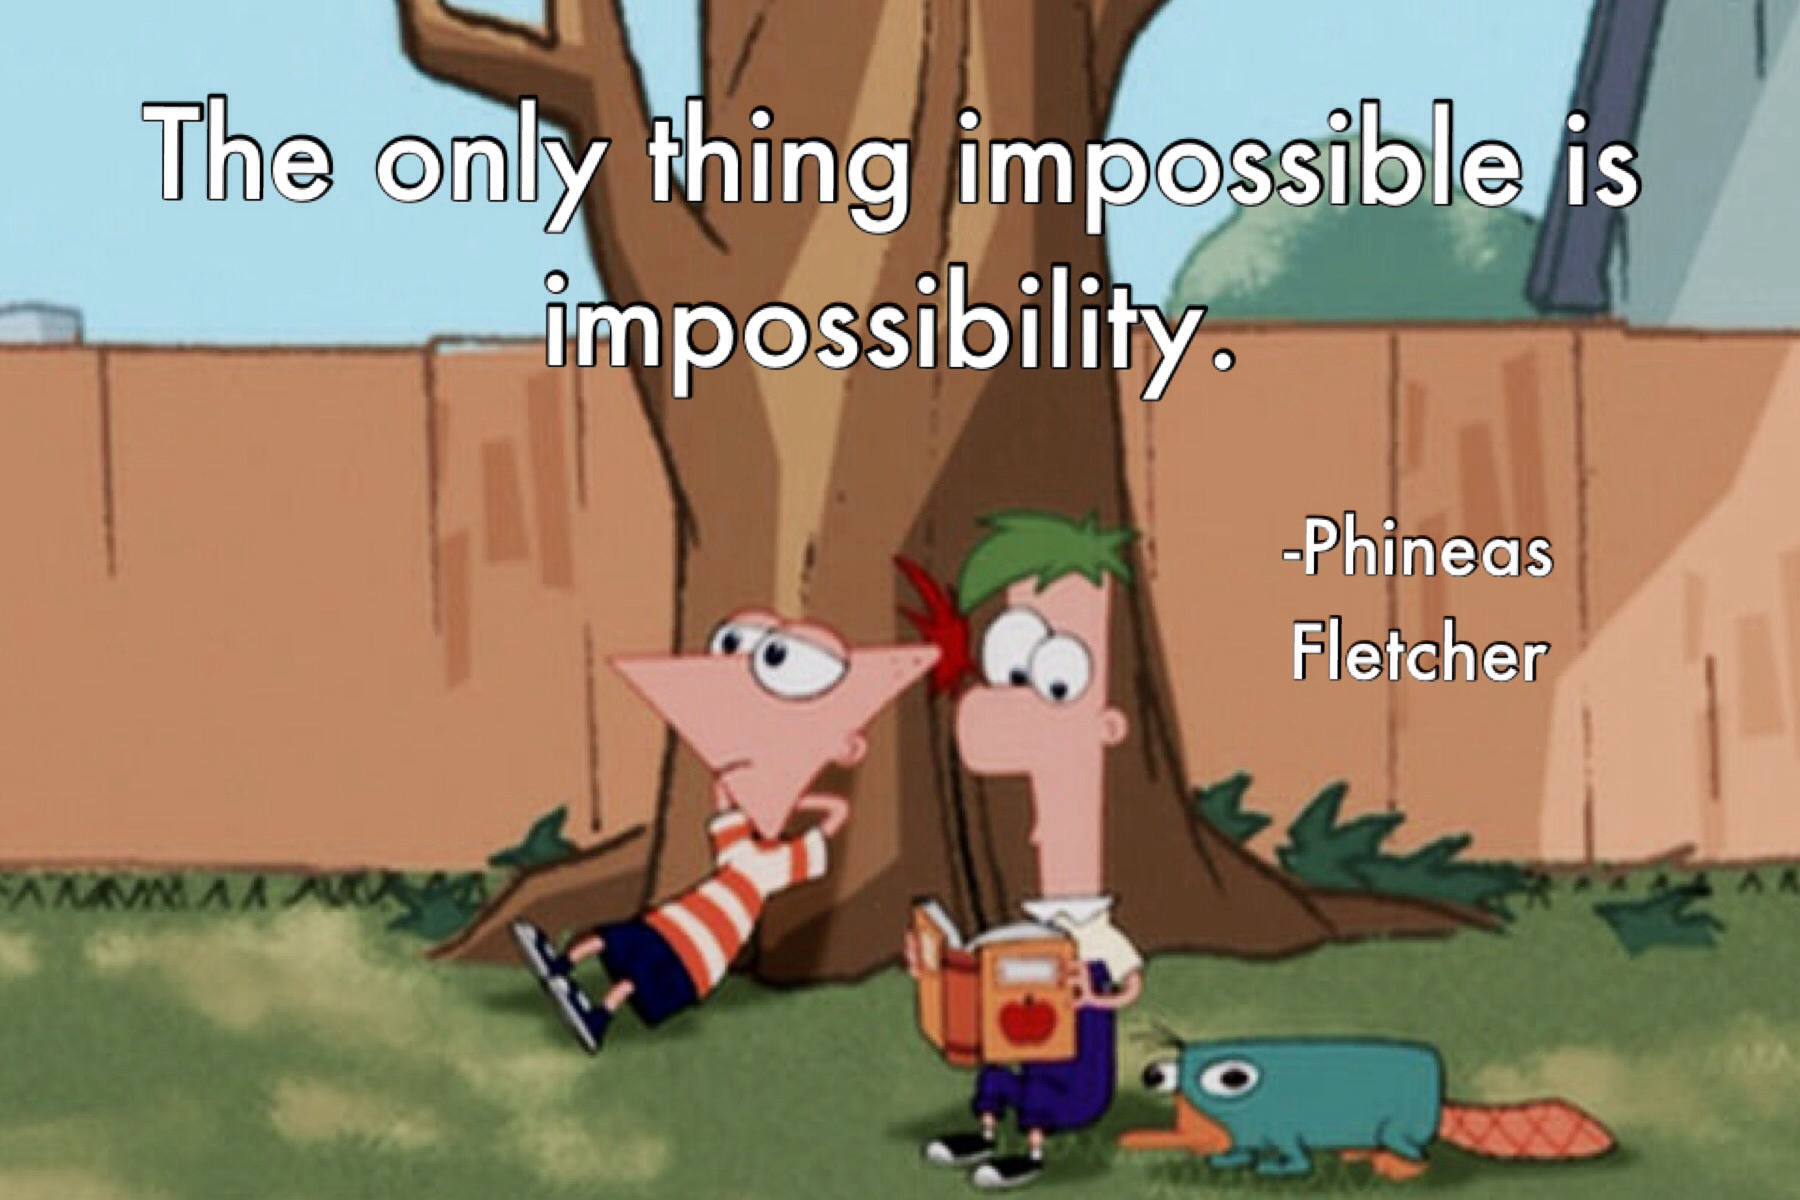 Phineas and Ferb Quotes. QuotesGram